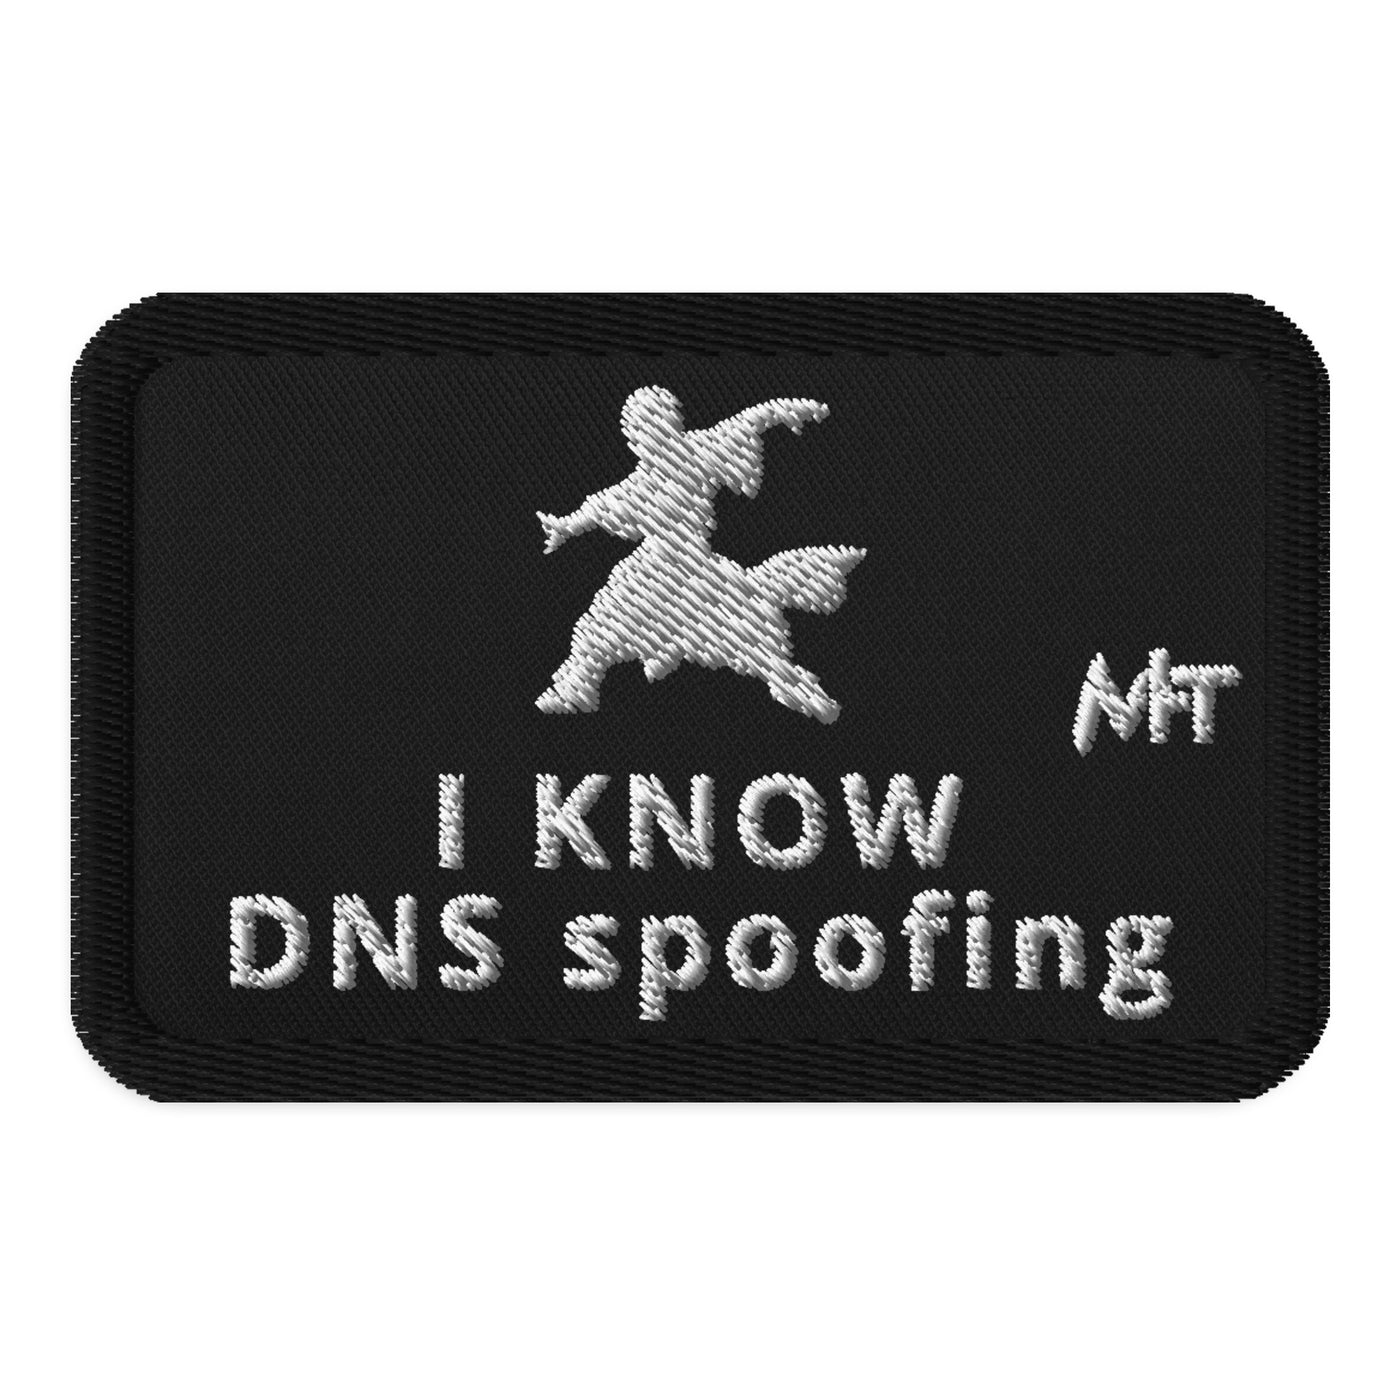 I Know DNS Spoofing - Embroidered patches